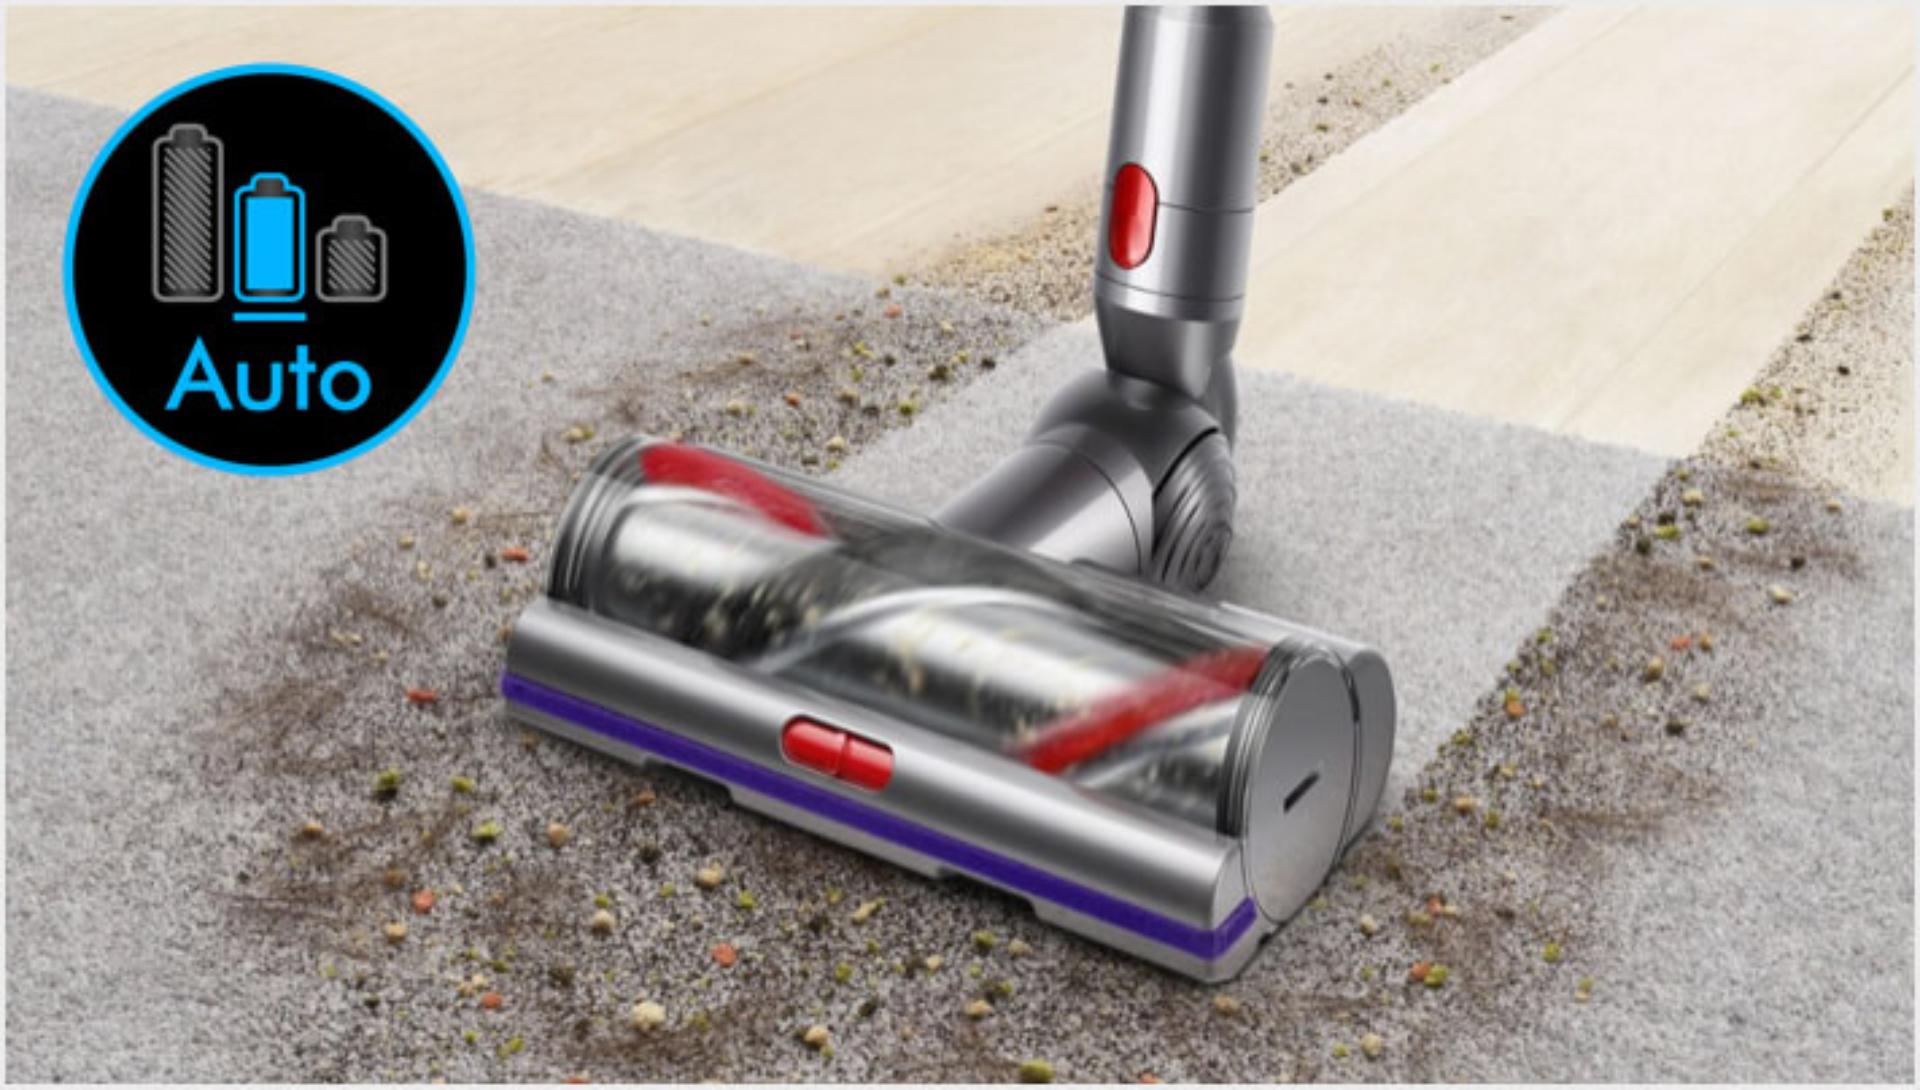 Dyson V11 vacuum being used on different floor types